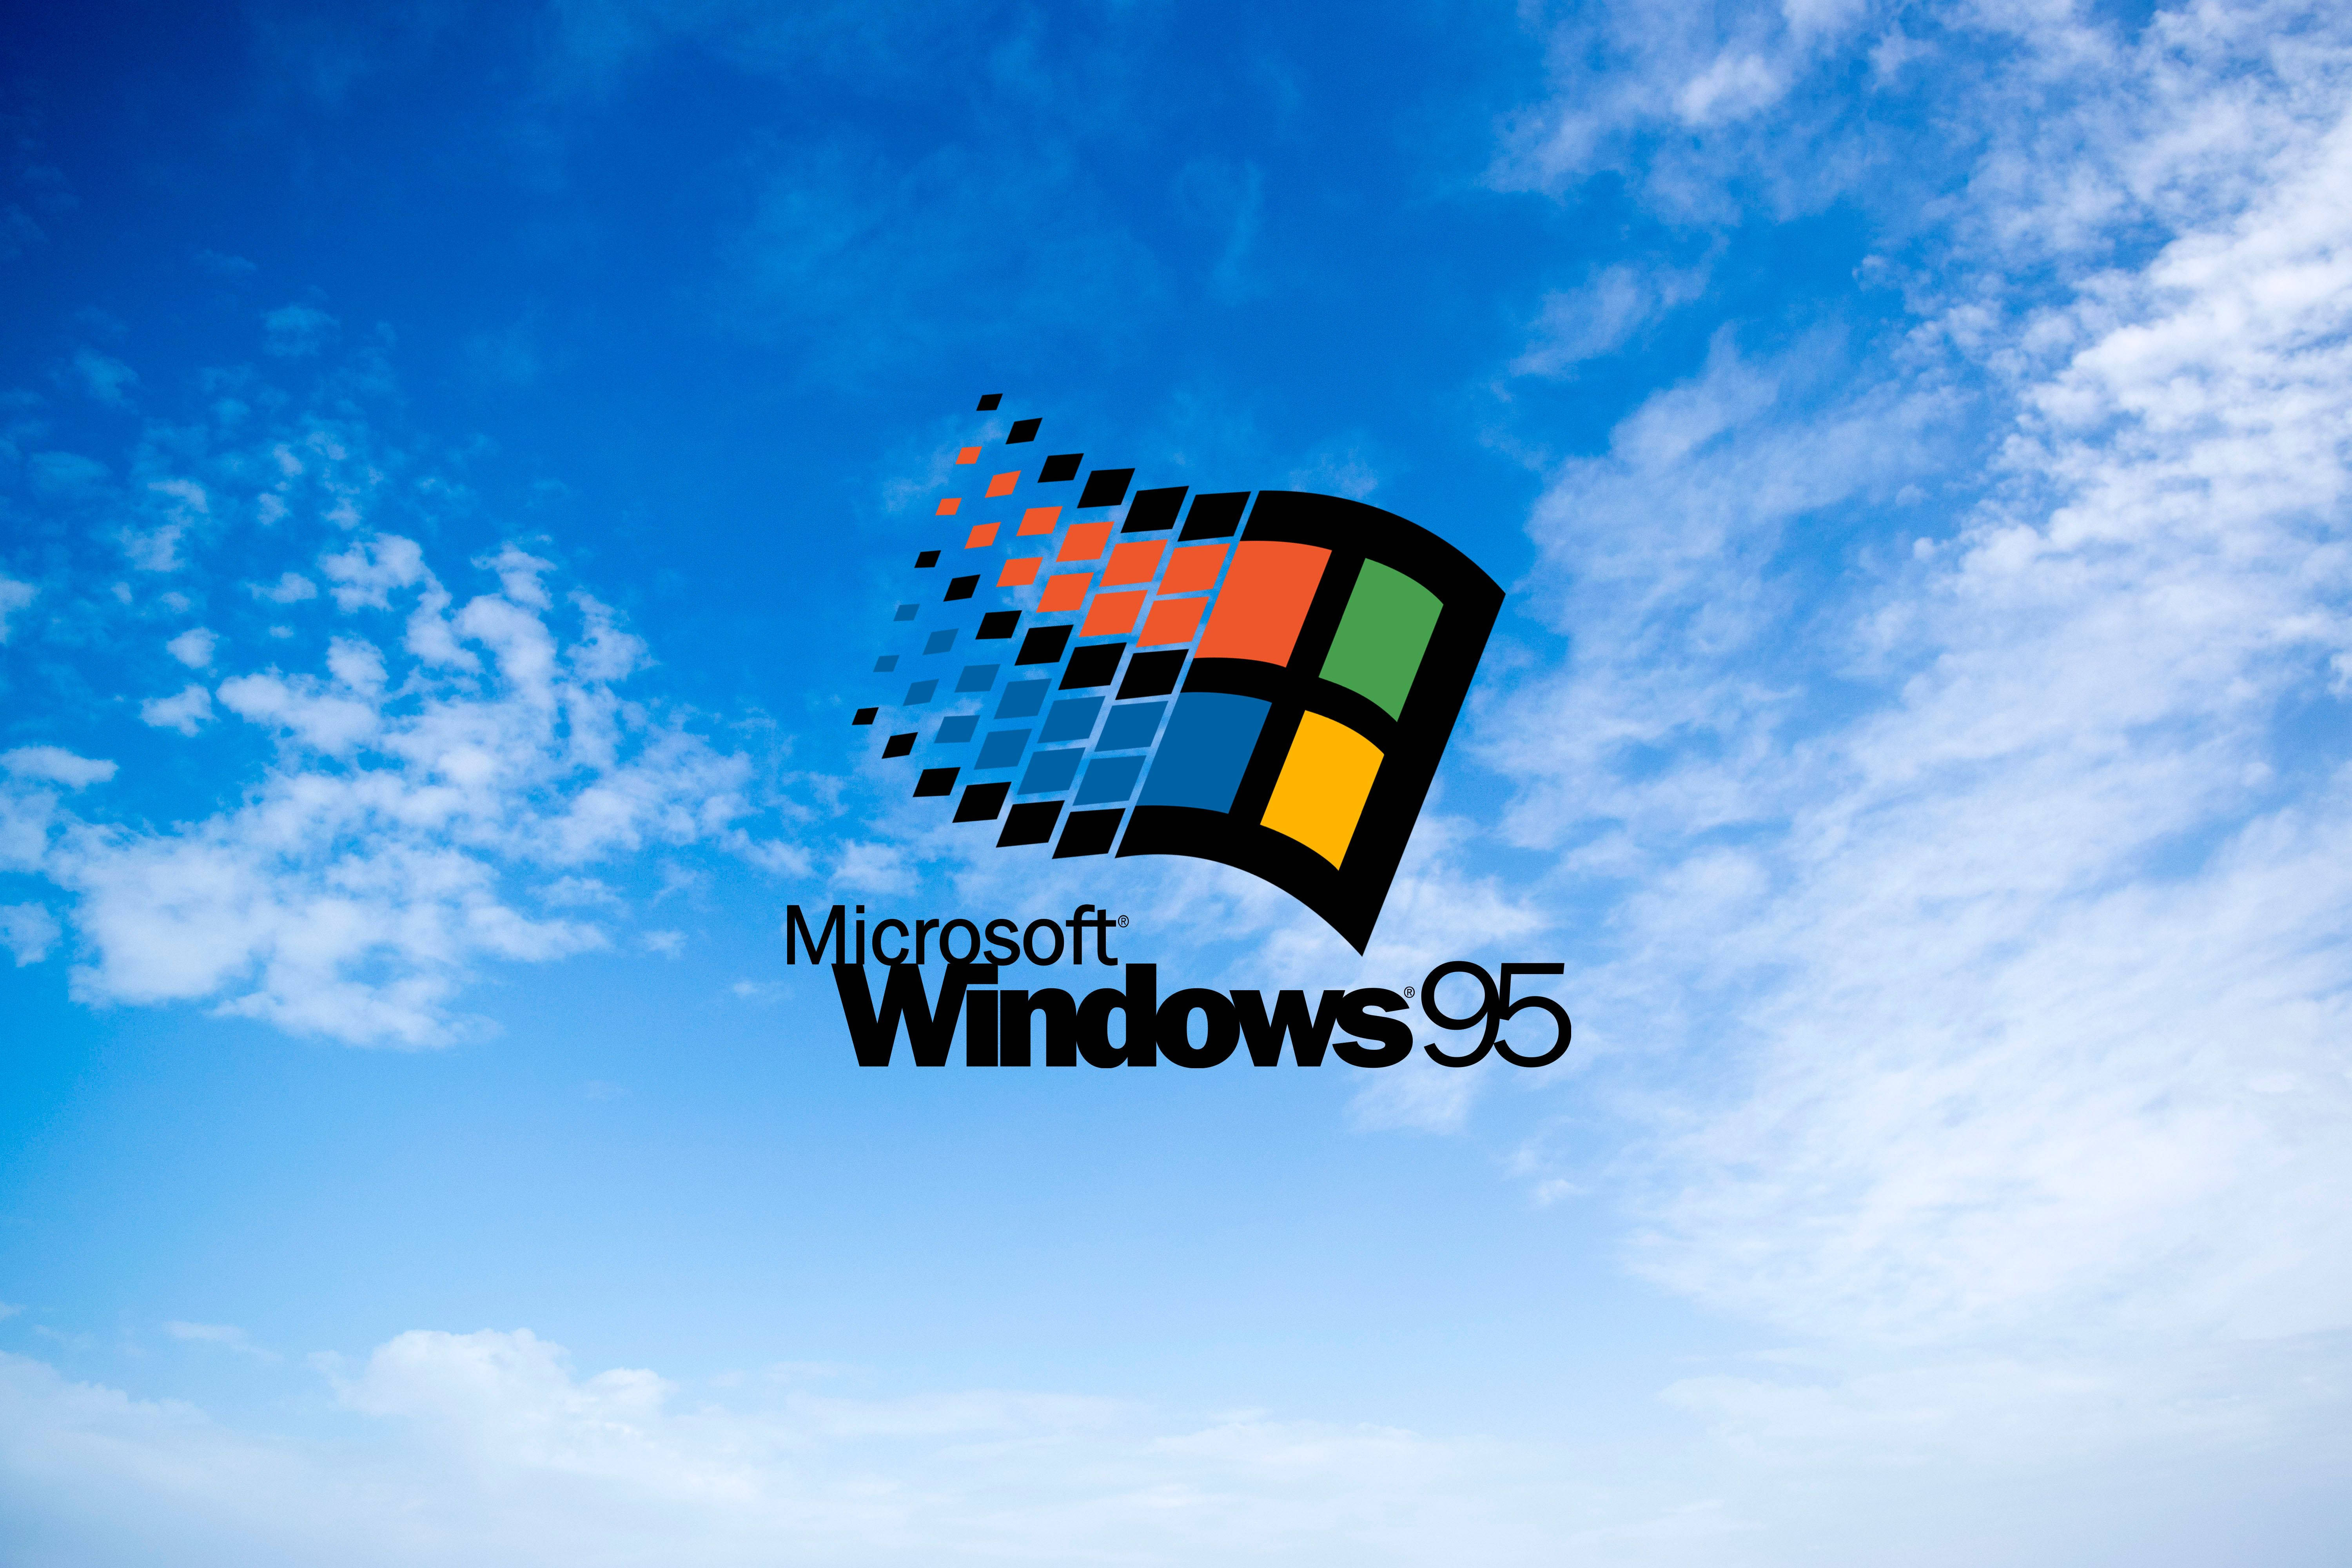 Remember the classic Windows 95 sky background And relive the memories